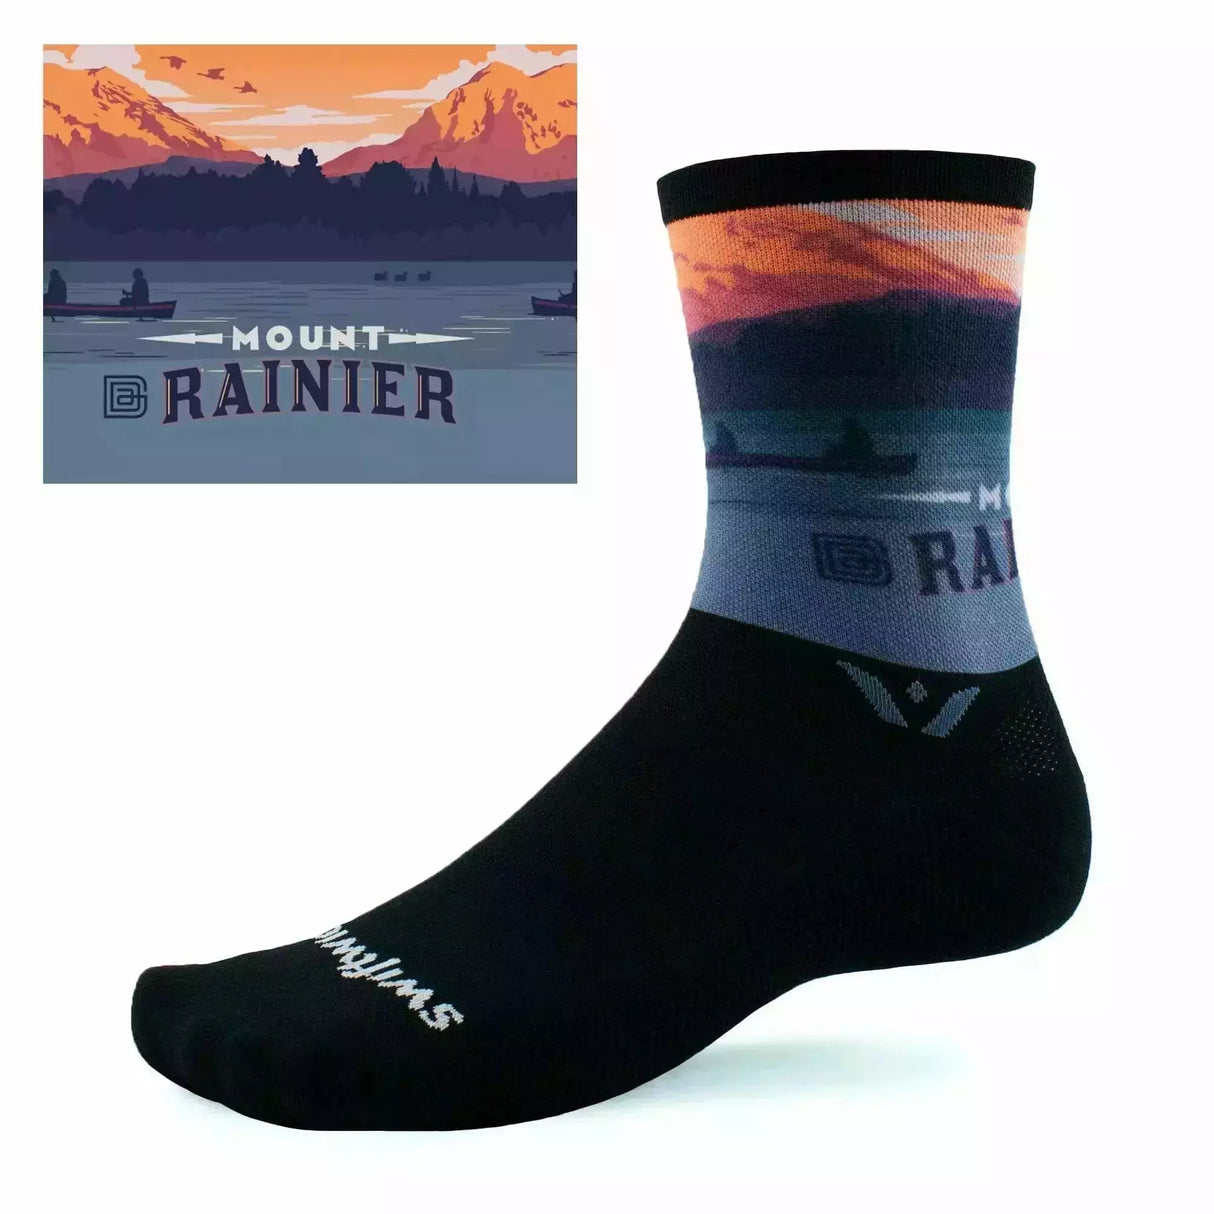 Swiftwick Vision Six Impression National Parks Collection Crew Socks  -  Small / Mount Rainier